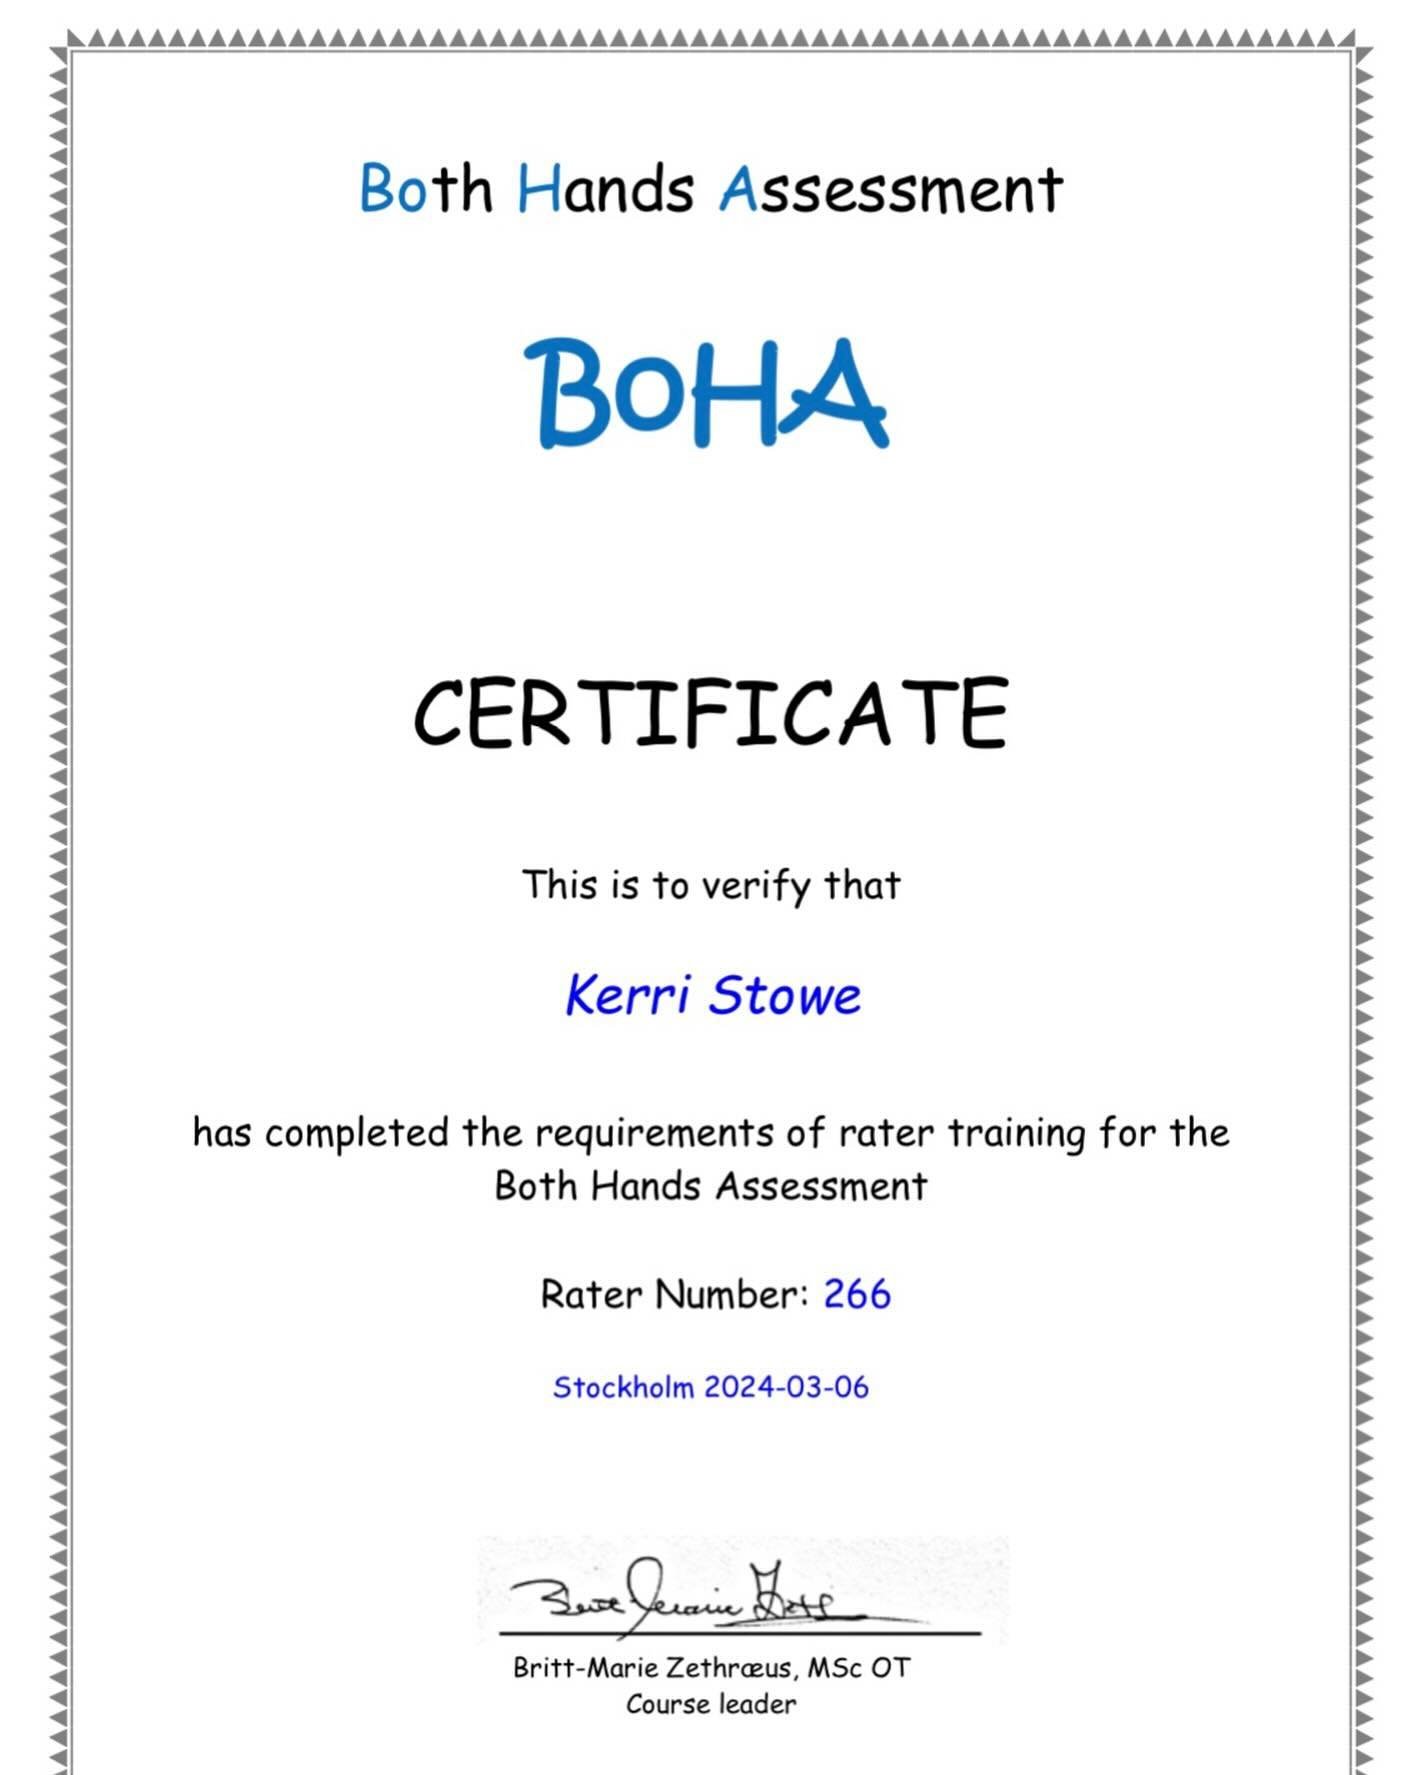 Kerri is now BOHA certified! ✔️ 

We are now able to offer a standardised assessment of the upper limb function for children with bilateral cerebral palsy GMFCS levels 1-3. 

This helpful tool allows for more in depth personalisation of therapy plans